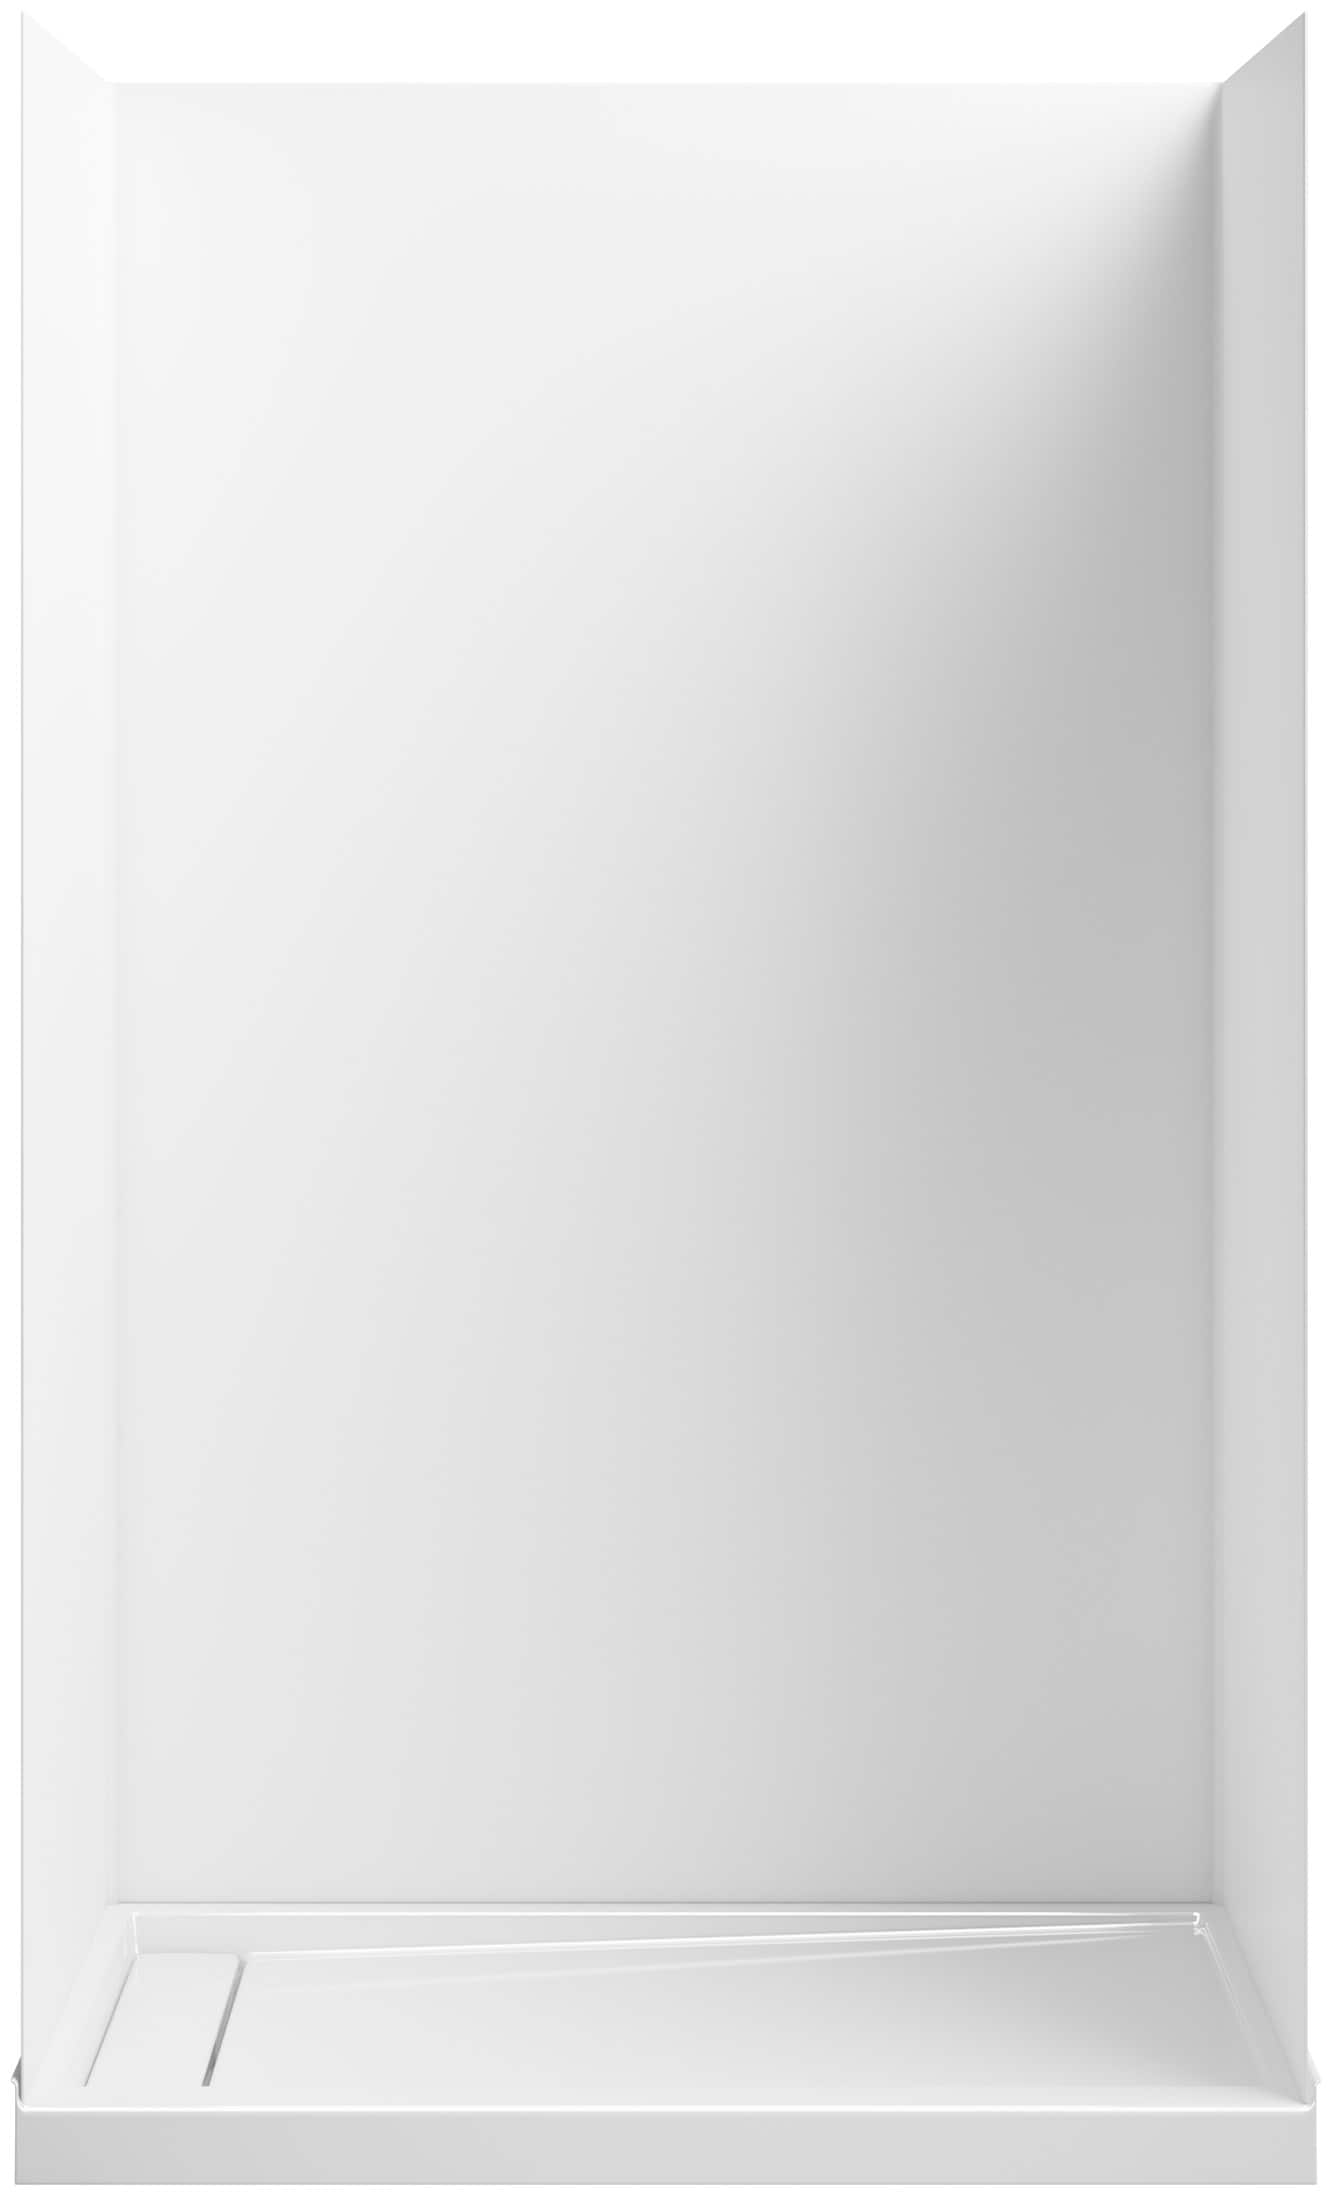 Kohler Choreograph 36 In W X 36 In D X 96 In H White One Piece Shower Wall Surround At